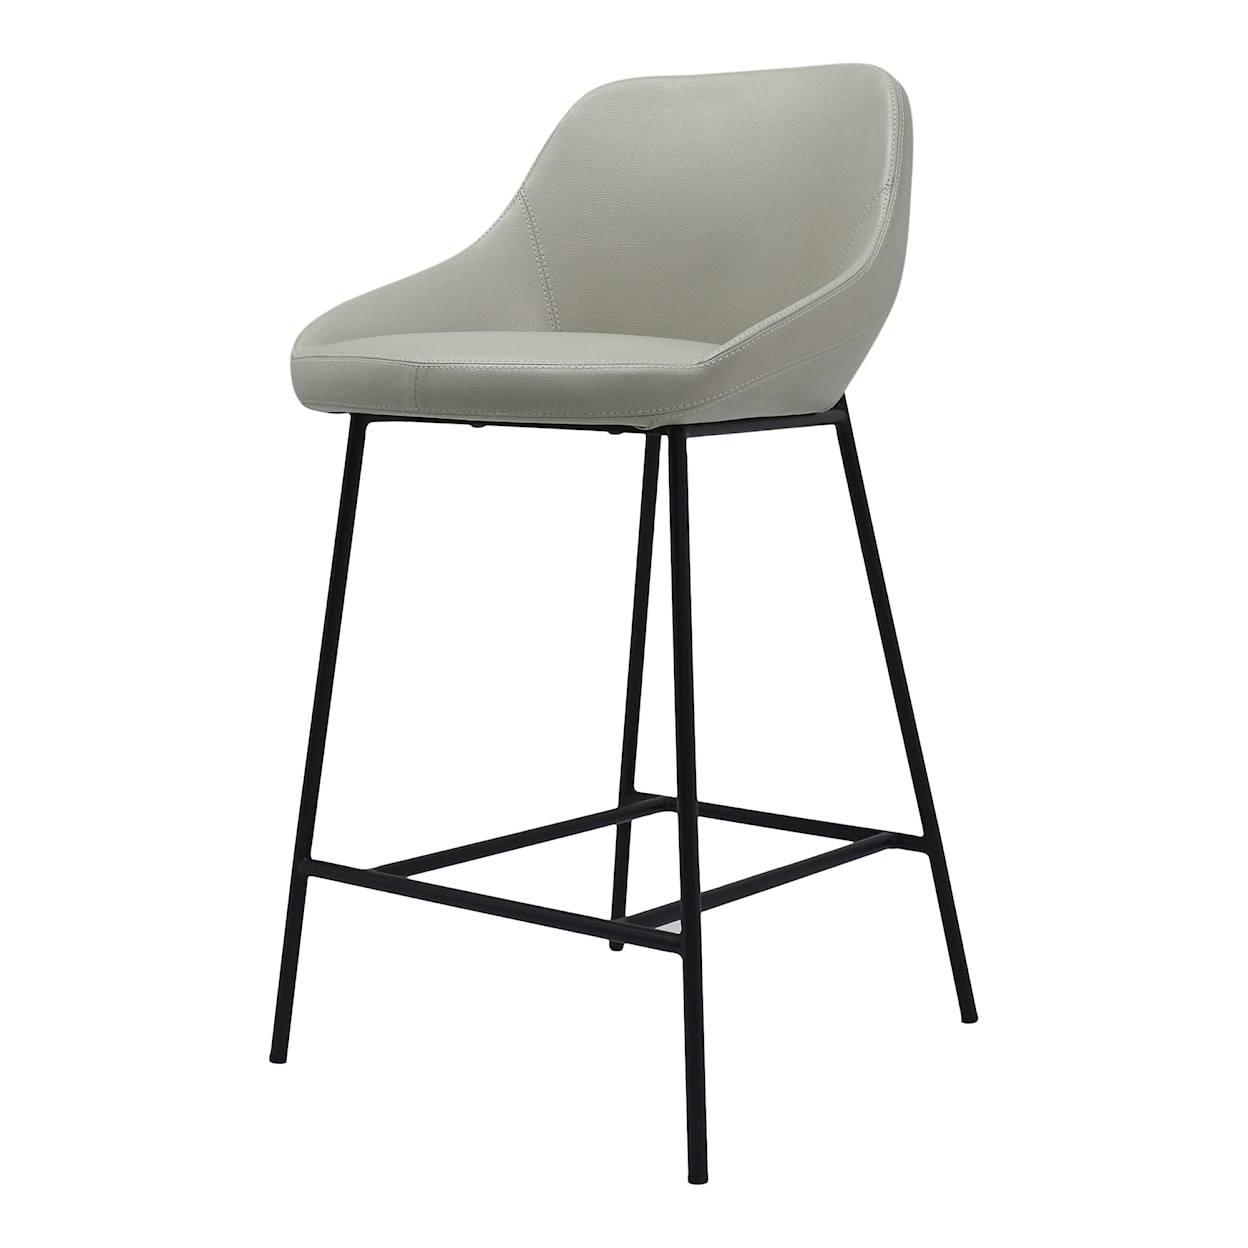 Moe's Home Collection Shelby Shelby Counter Stool Beige